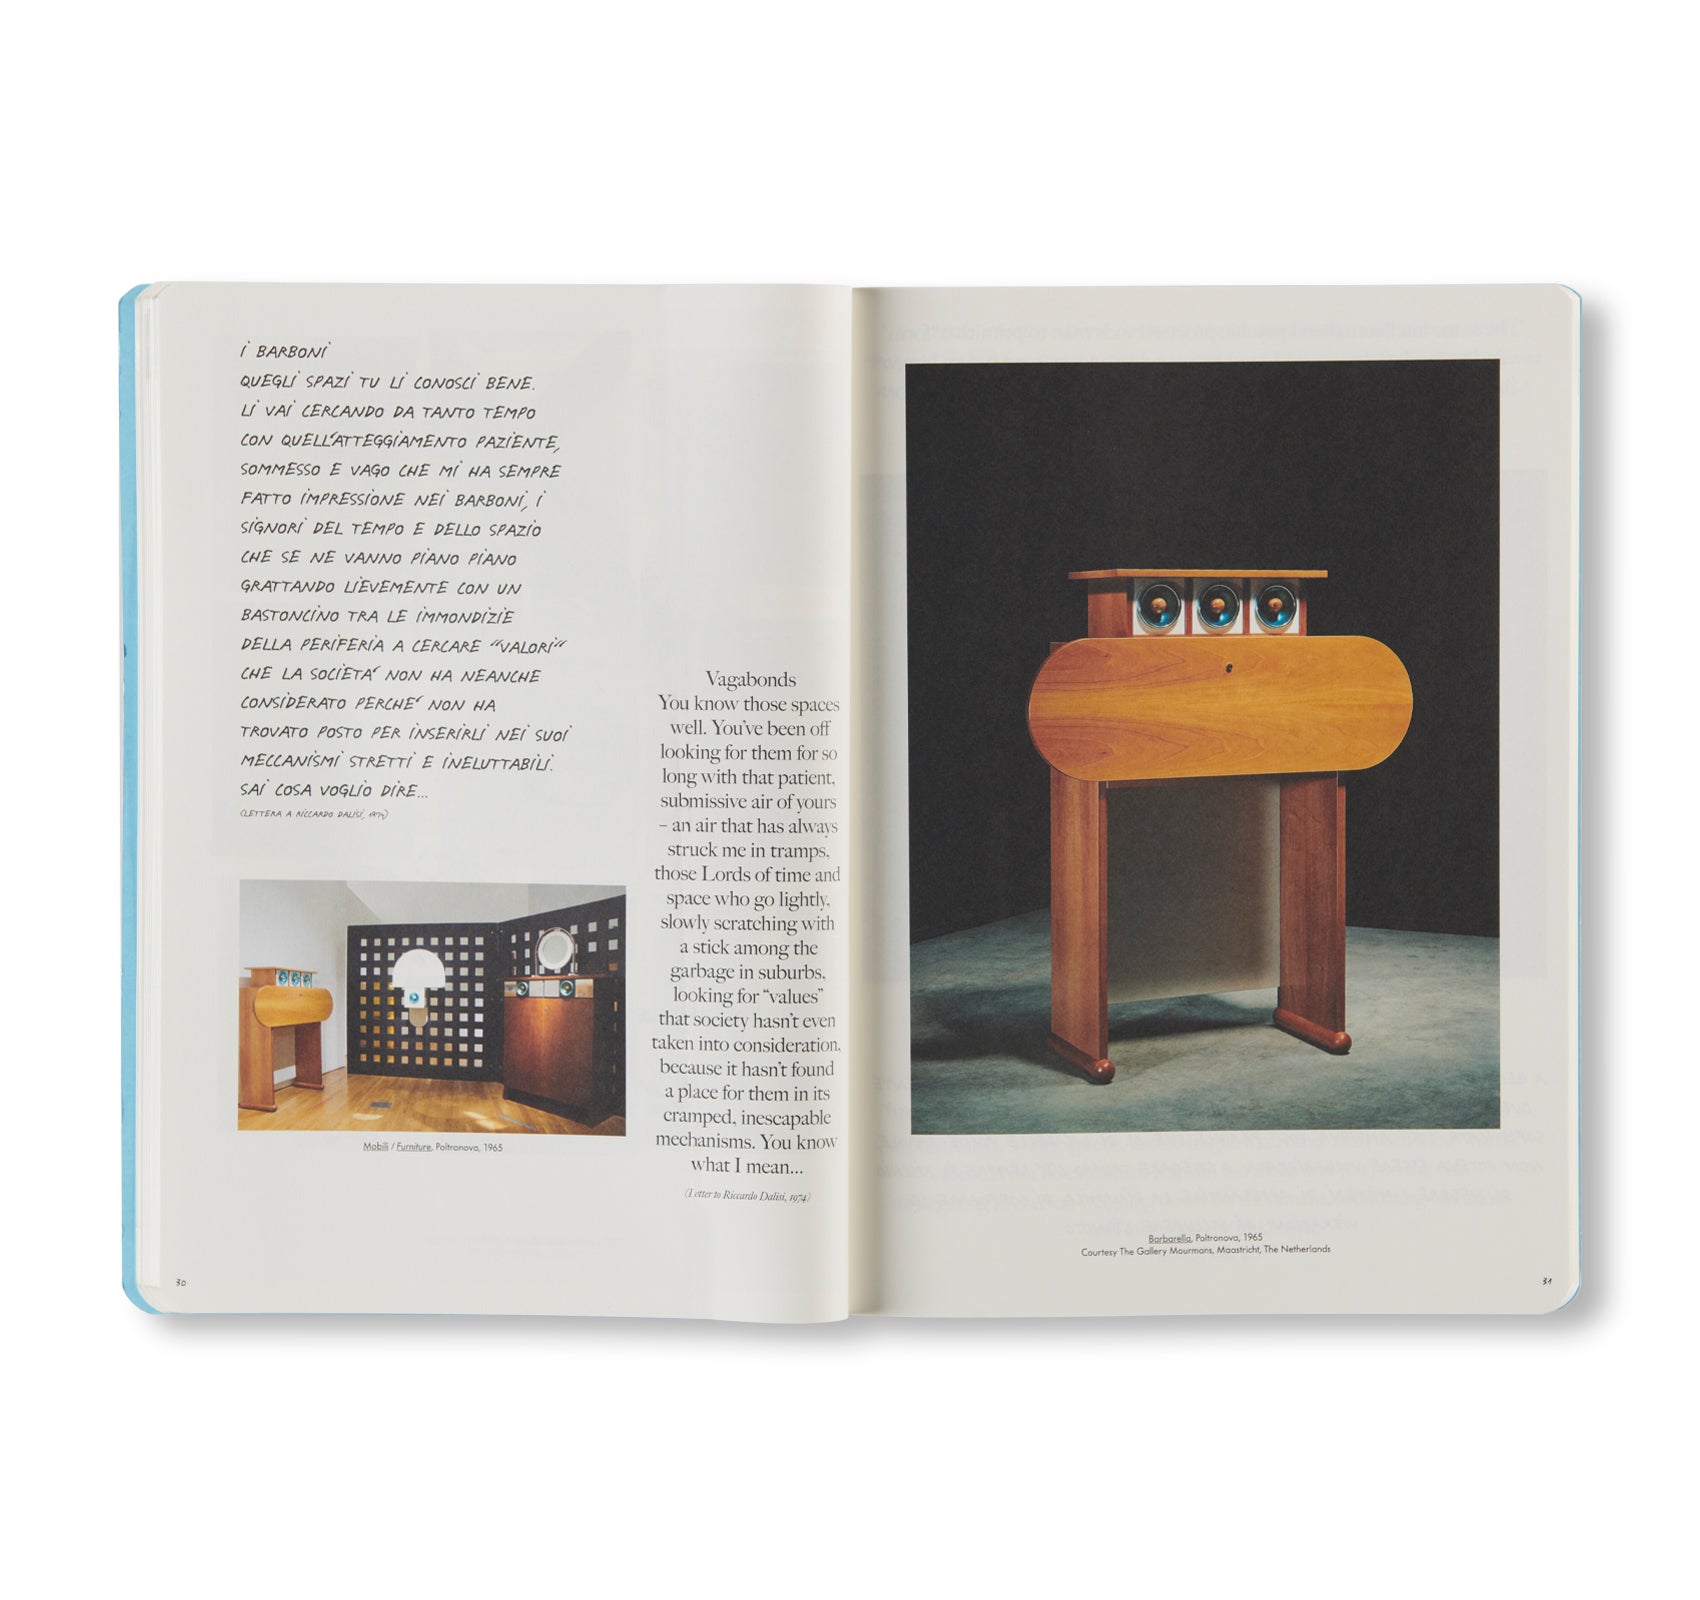 THERE IS A PLANET. EXHIBITION CATALOGUE TRIENNALE DESIGN MUSEUM by Ettore Sottsass